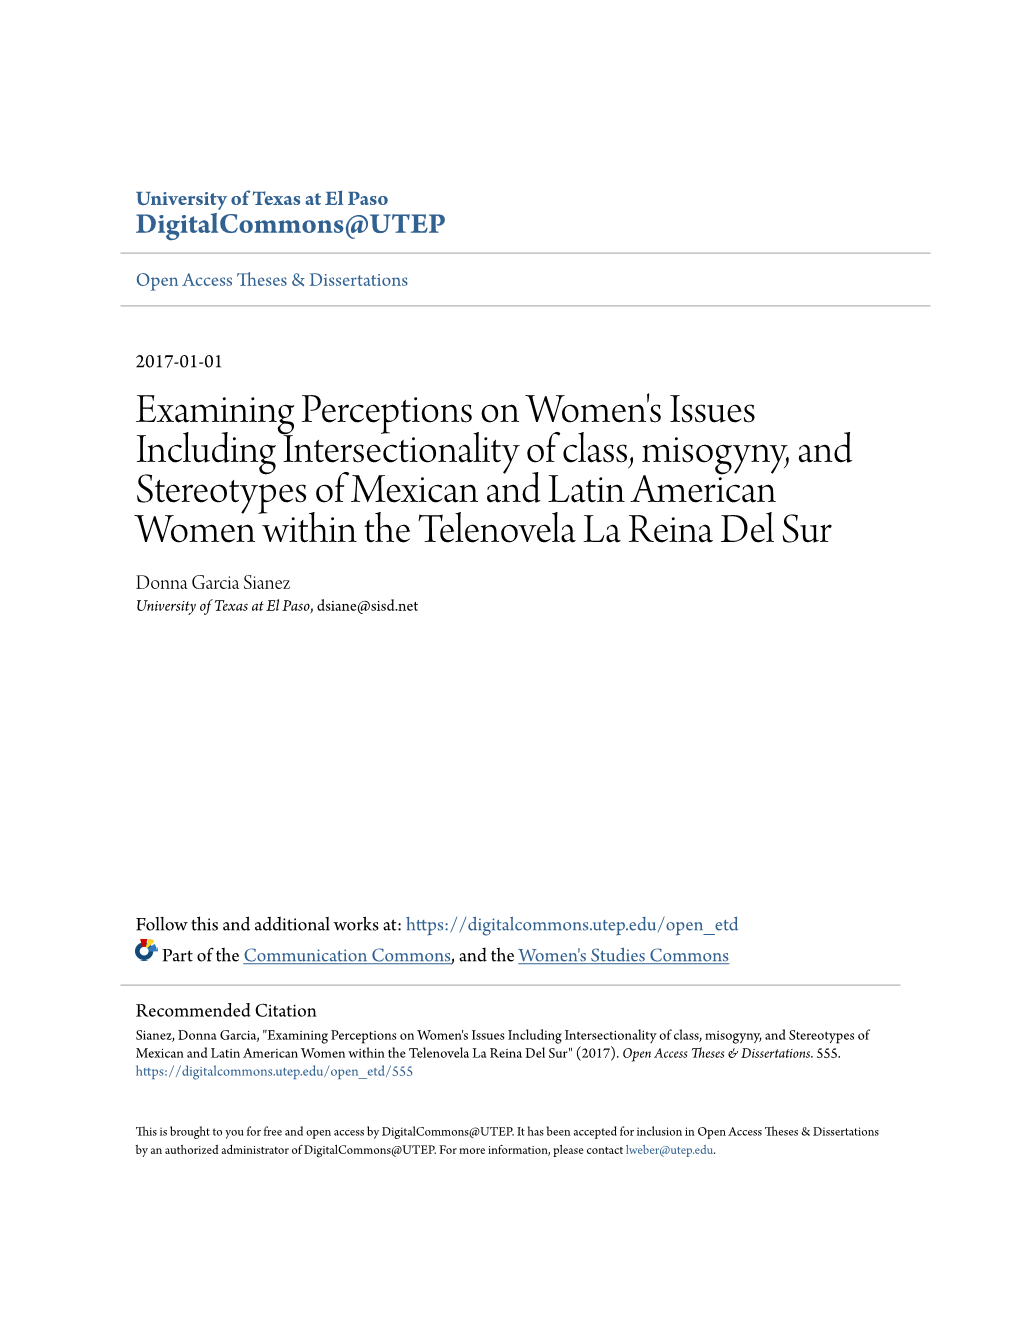 Examining Perceptions on Women's Issues Including Intersectionality Of